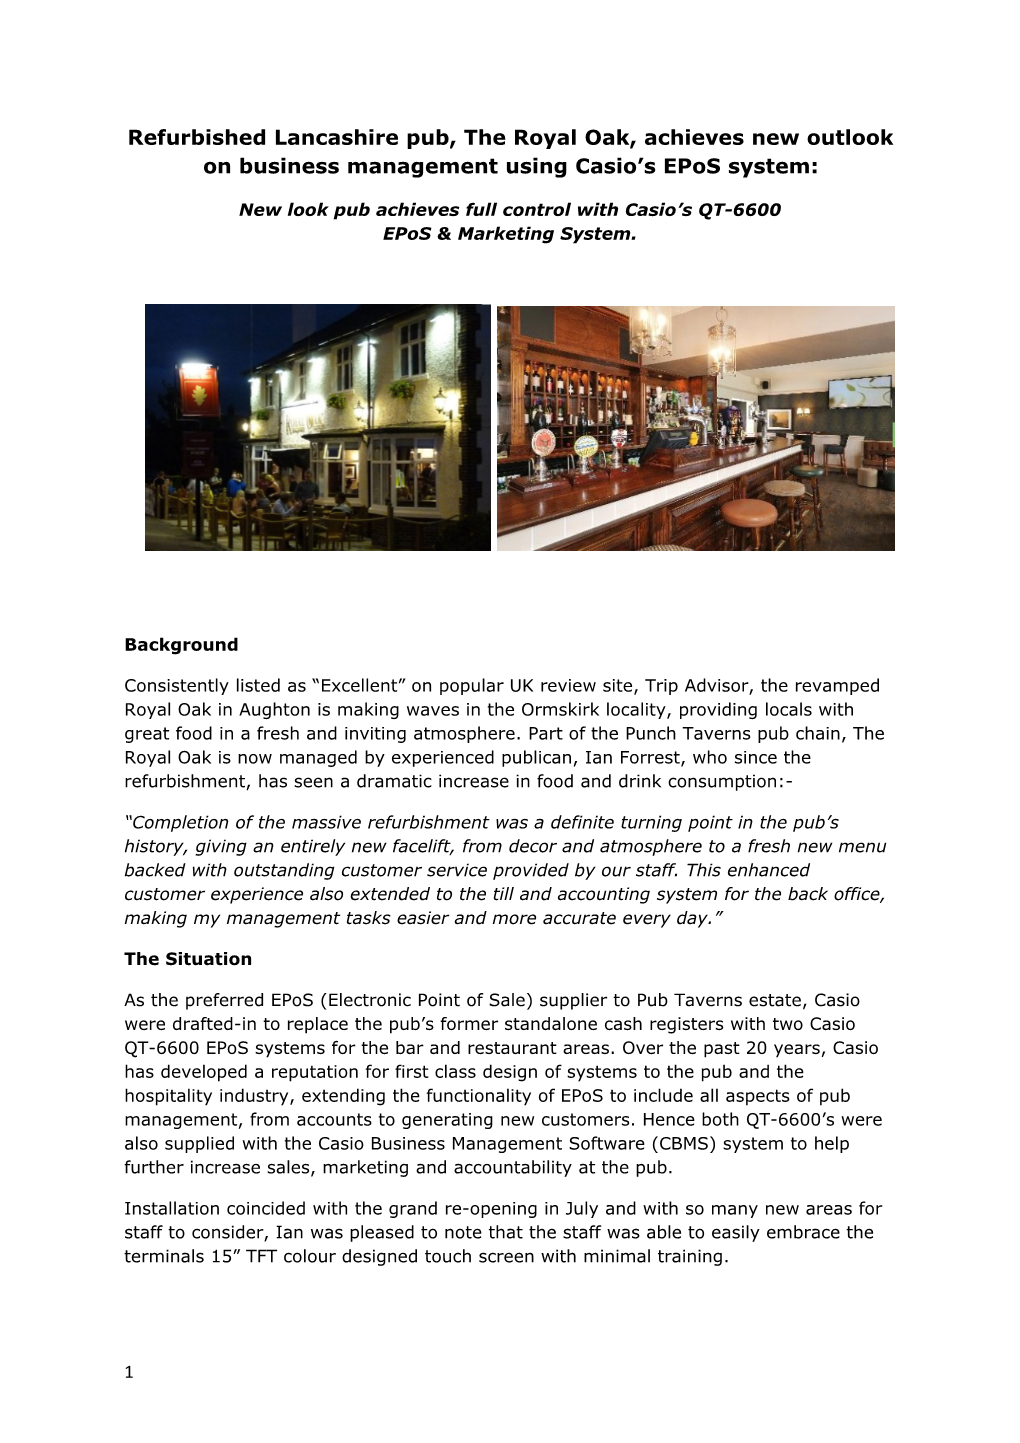 New Look Pub Achieves Full Control with Casio S QT-6600 Epos & Marketing System